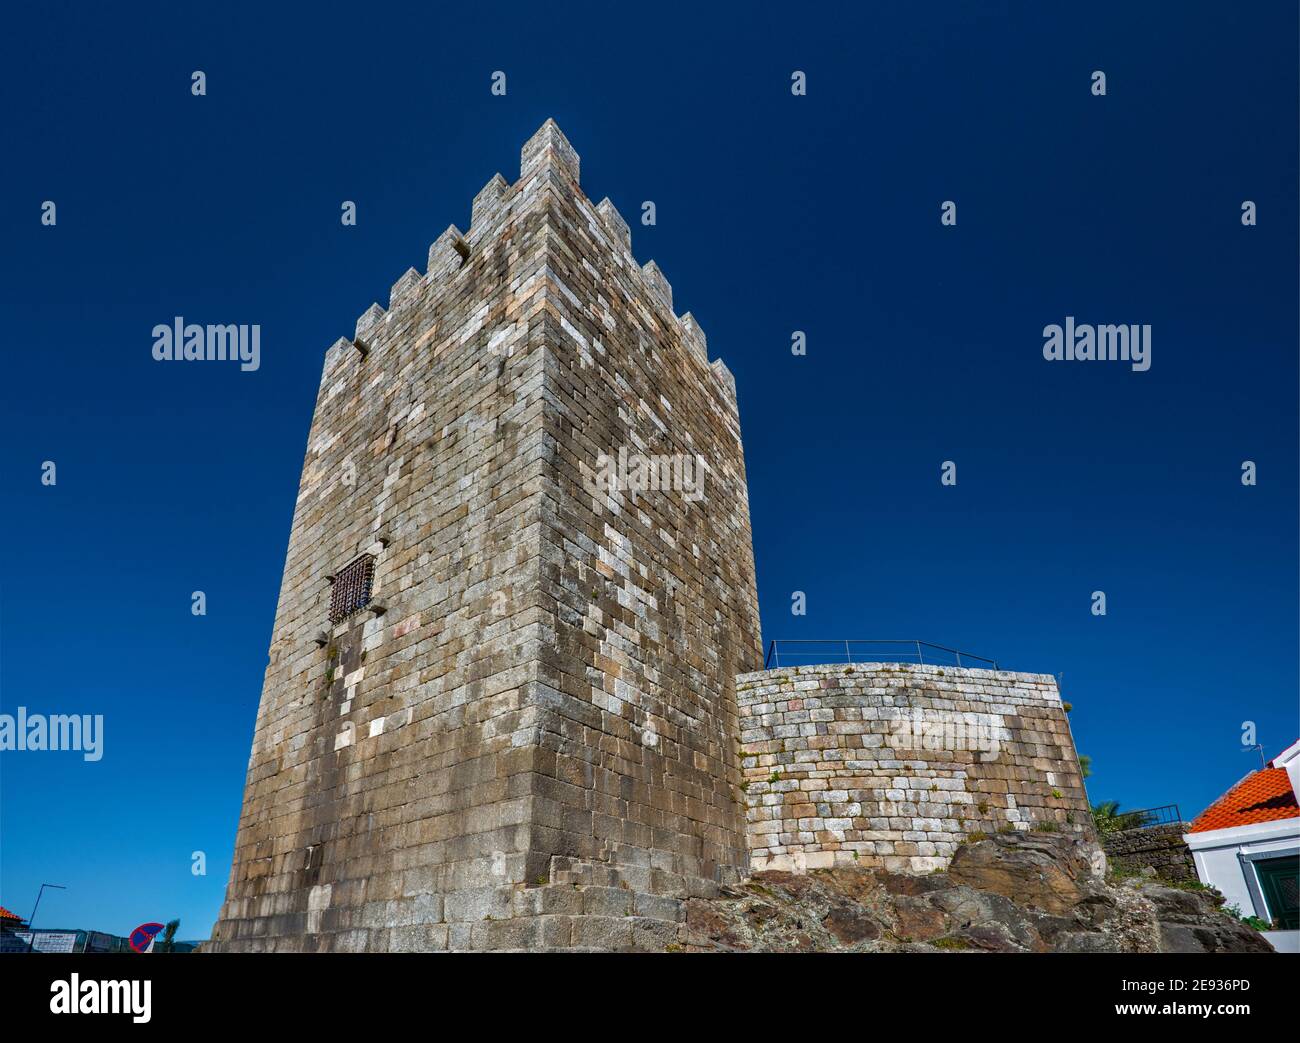 The keep tower at Castelo de Lamego, castle in Lamego, Norte region, Portugal Stock Photo